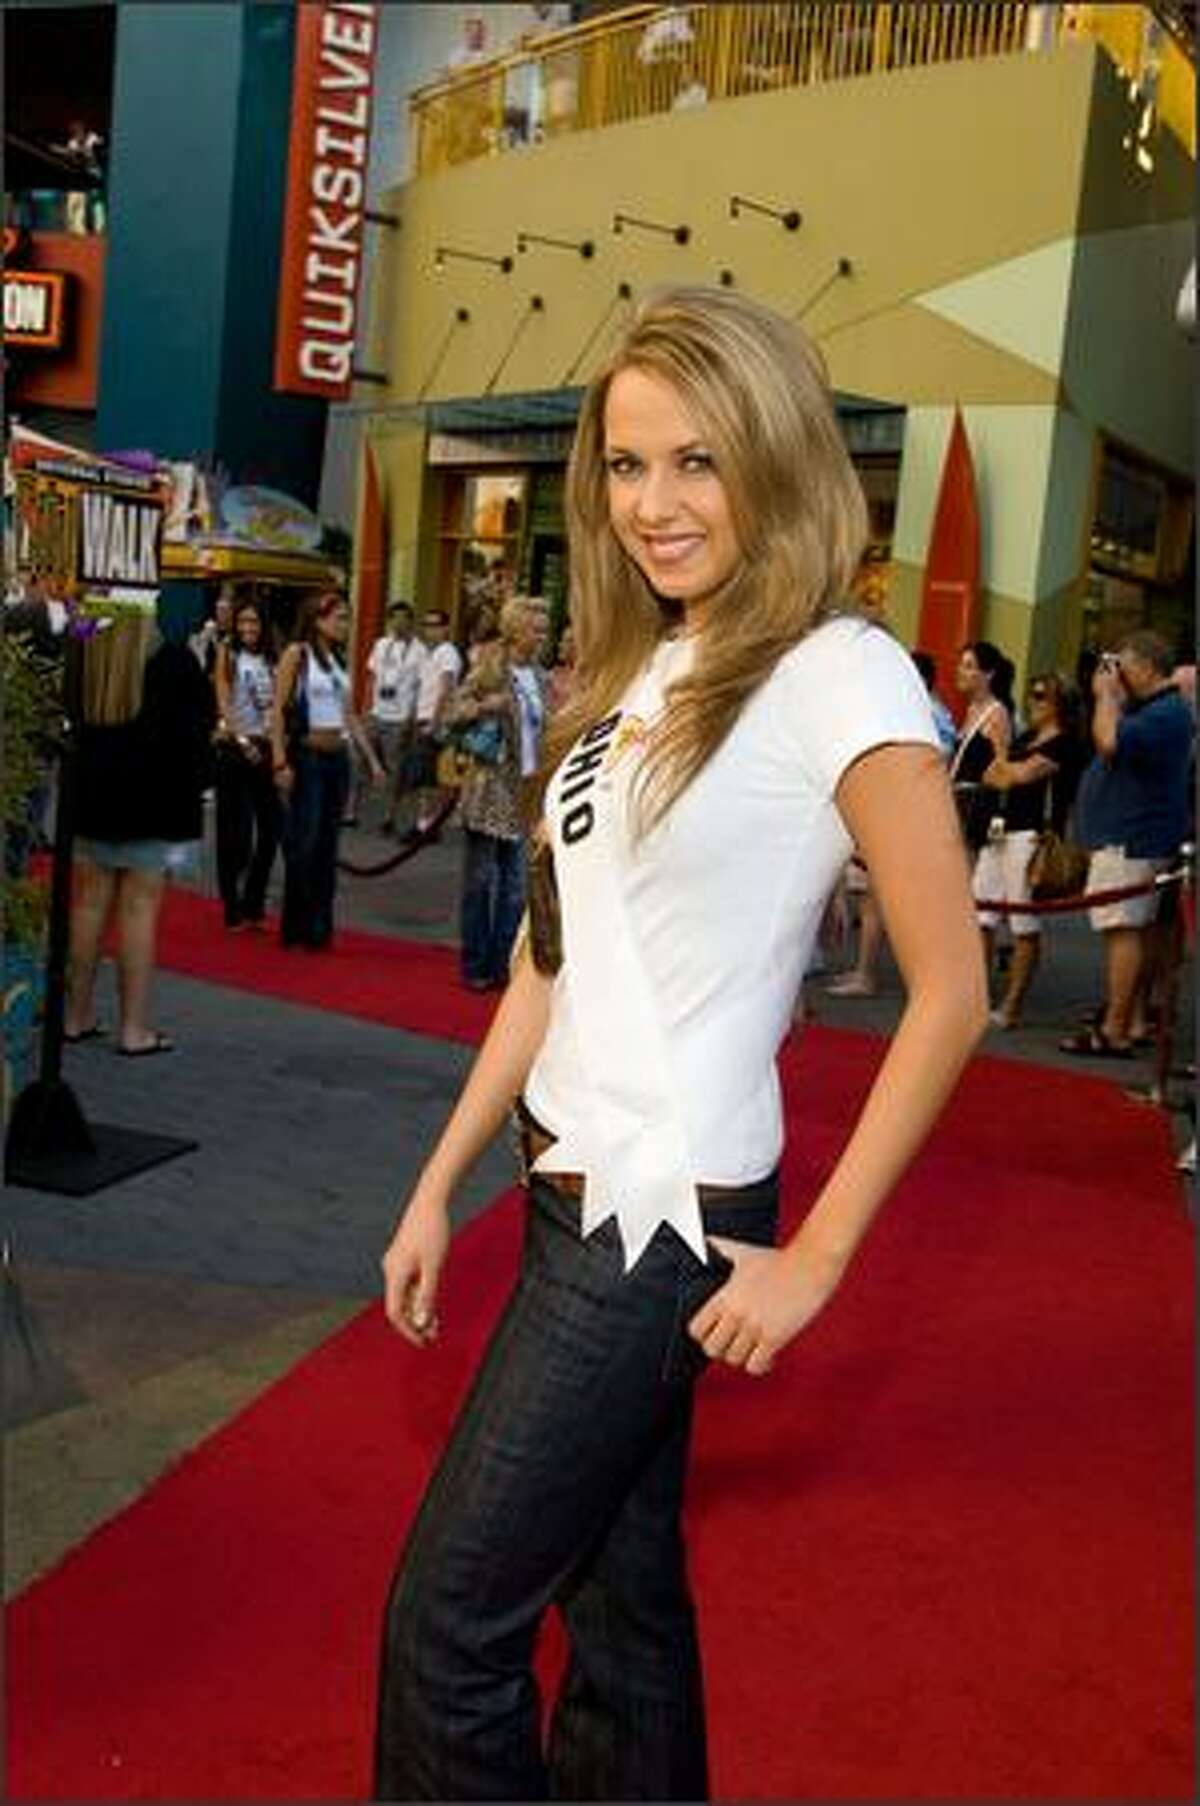 Anna Melomud, Miss Ohio USA 2007, walks the red carpet at the Hard Rock Cafe.